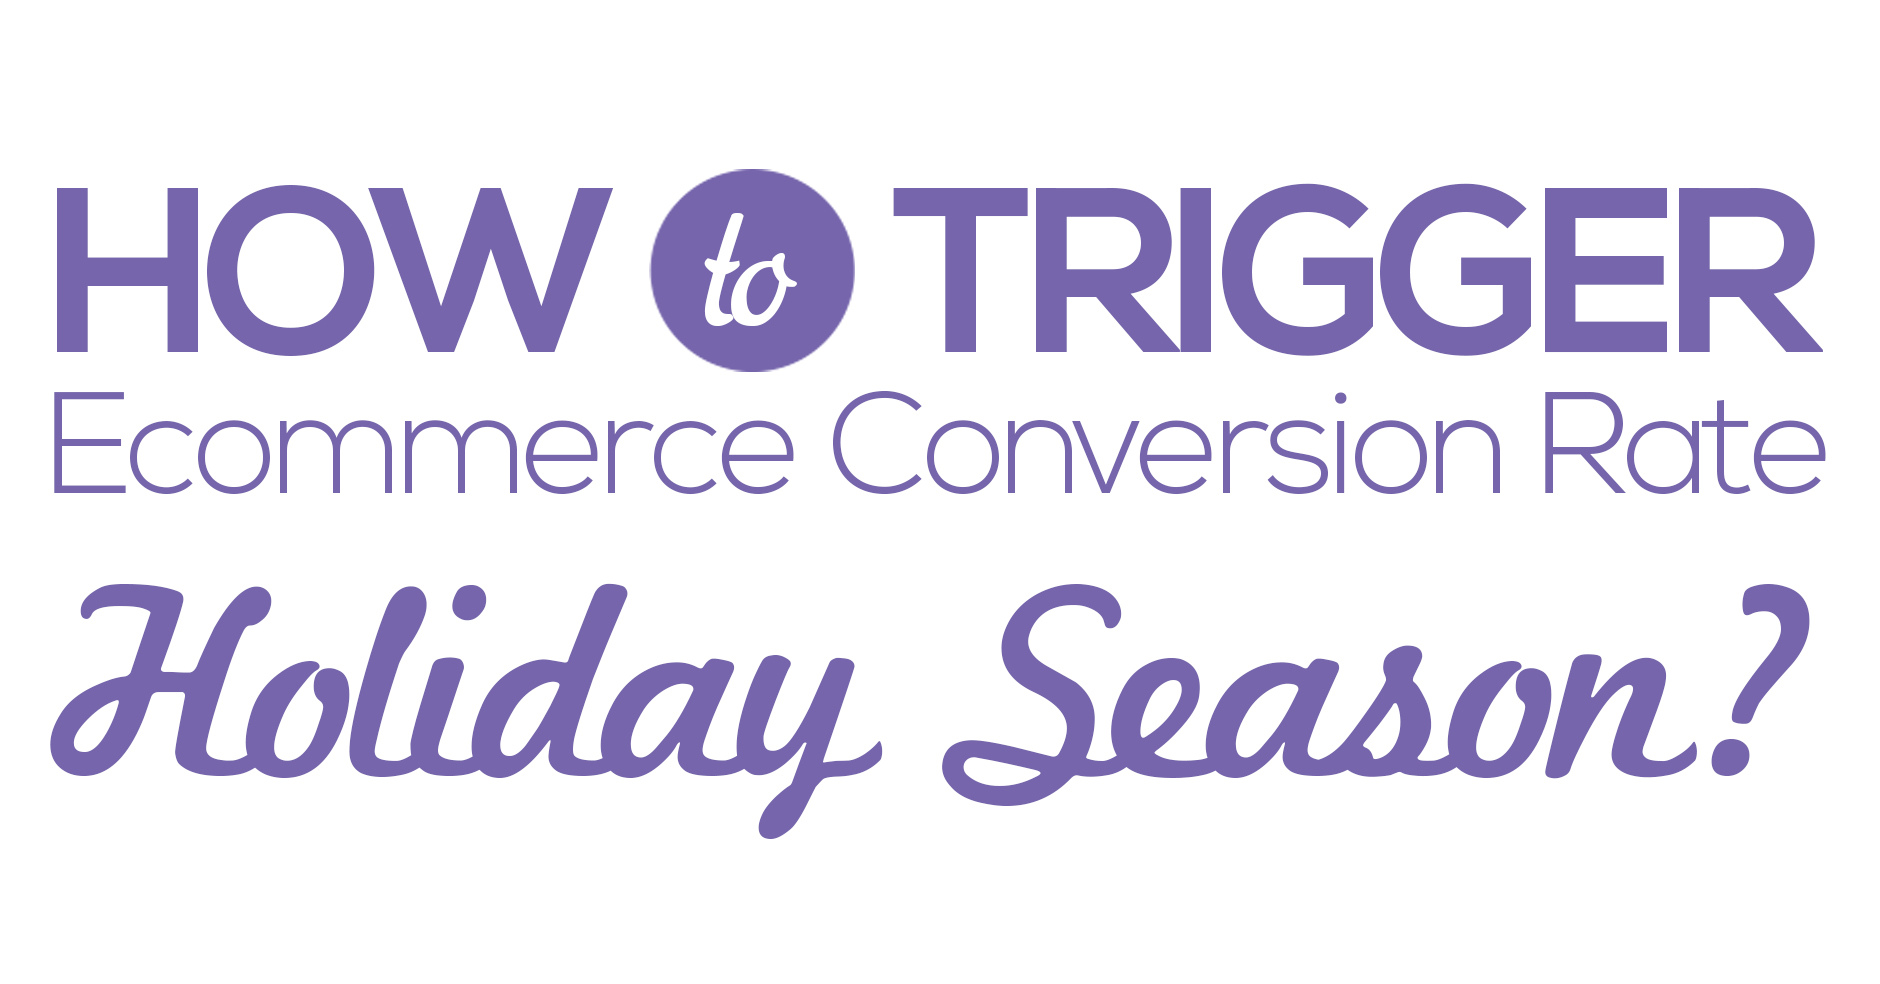 how to trigger ecommerce conversion rate this holiday season thumbnail image